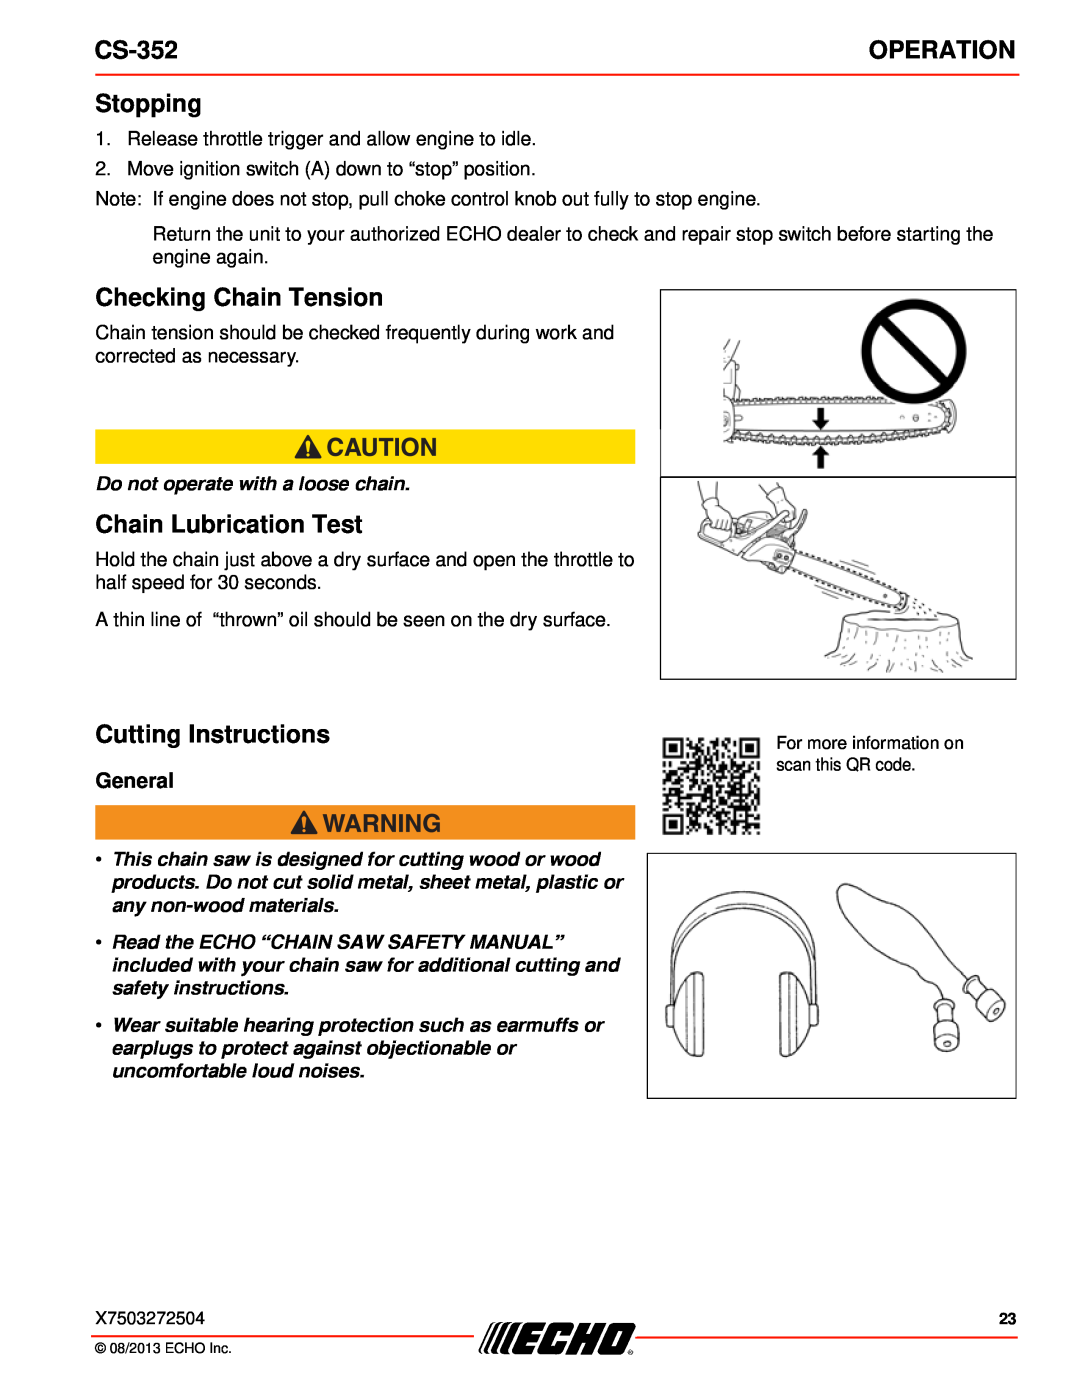 Echo CS-352 Stopping, Checking Chain Tension, Chain Lubrication Test, Cutting Instructions, General, Operation 